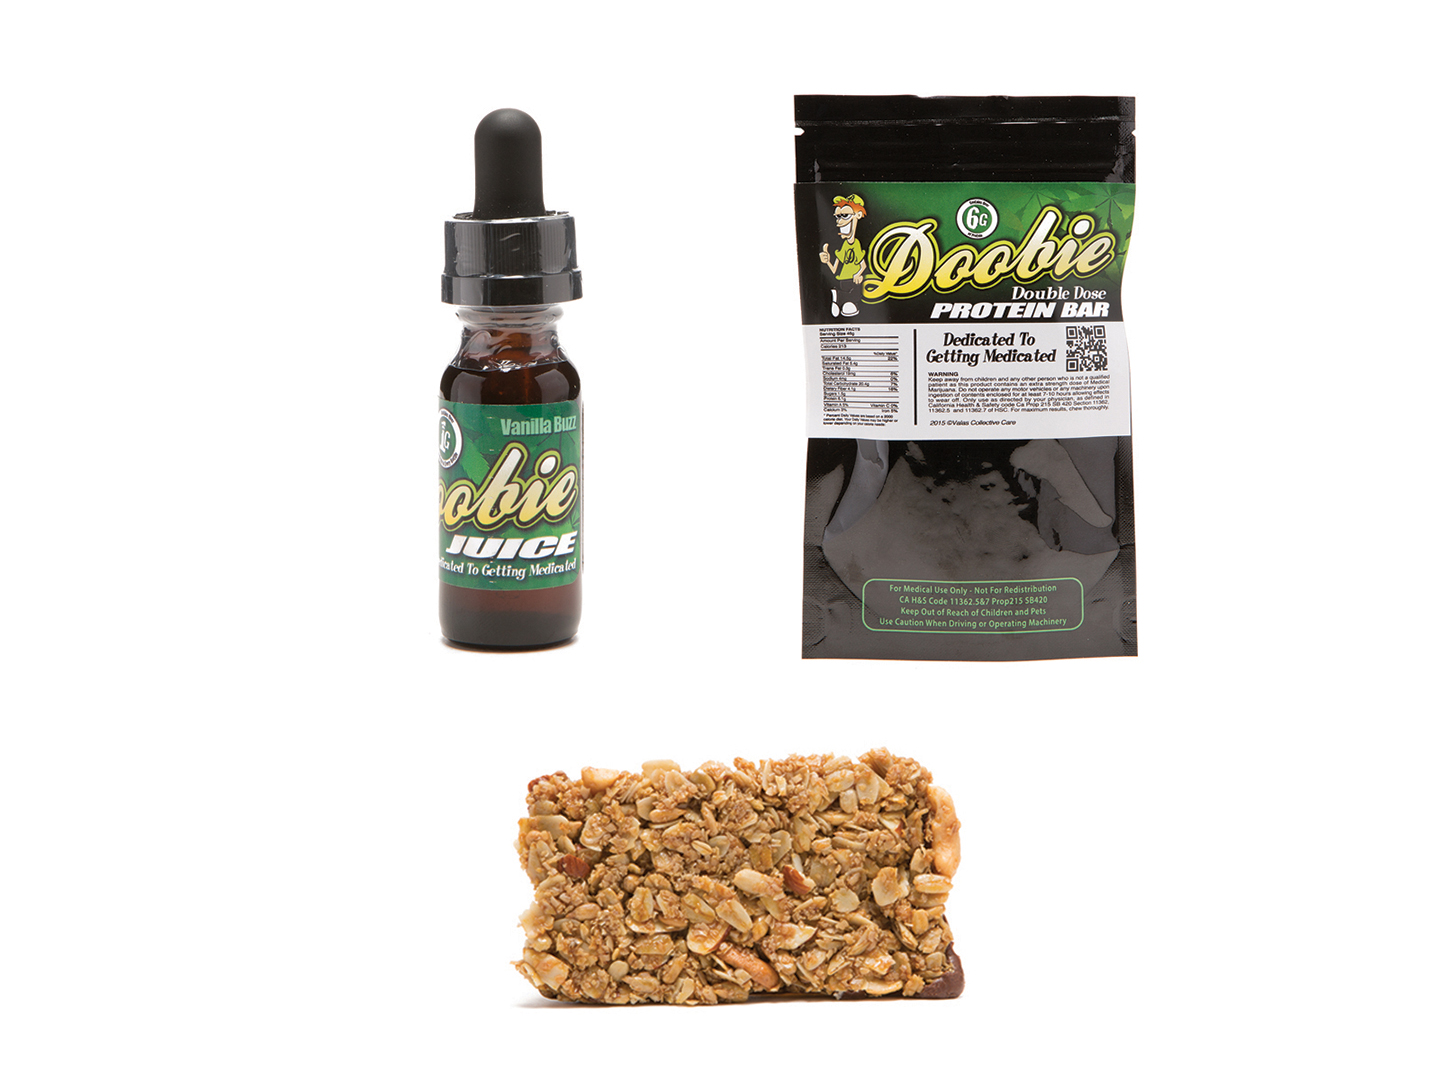 THE DOOBIE COMPANY INFUSED PRODUCT REVIEWS